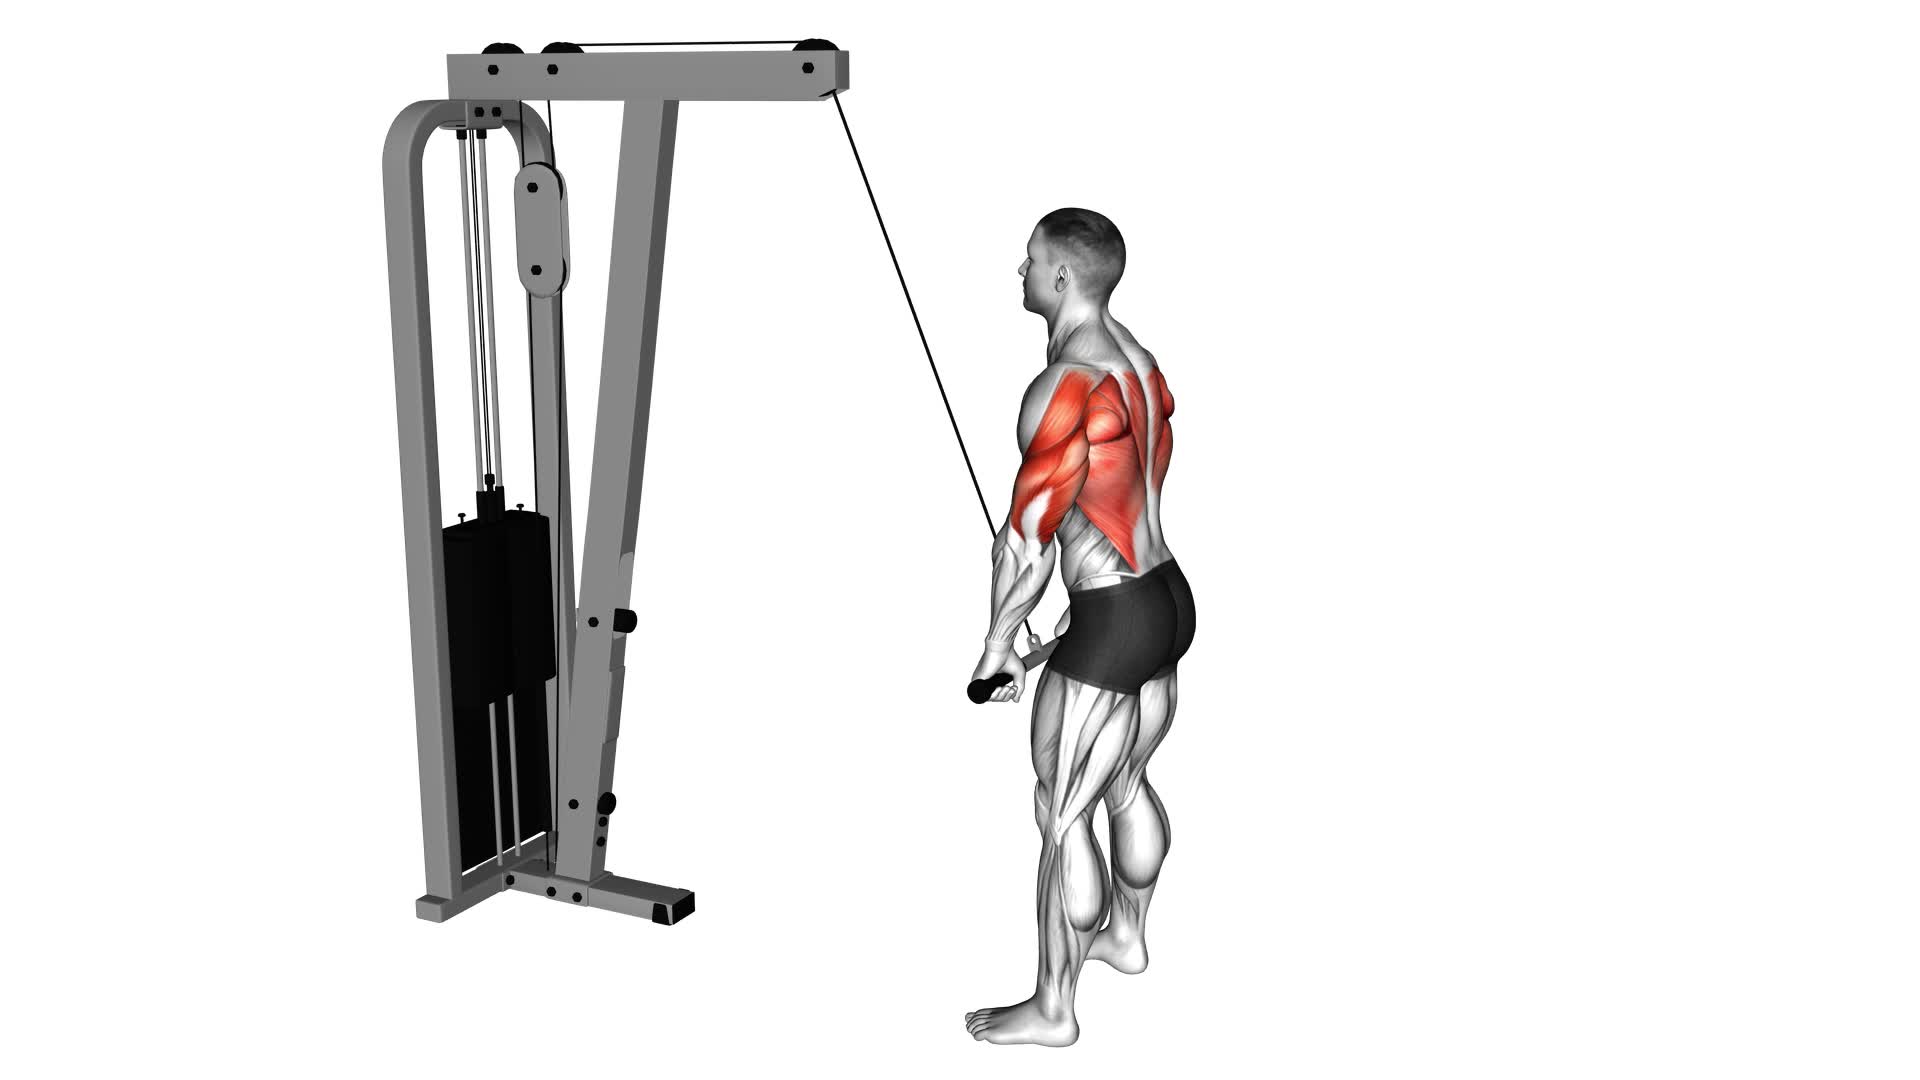 Cable Straight Arm Pulldown - Video Exercise Guide & Tips